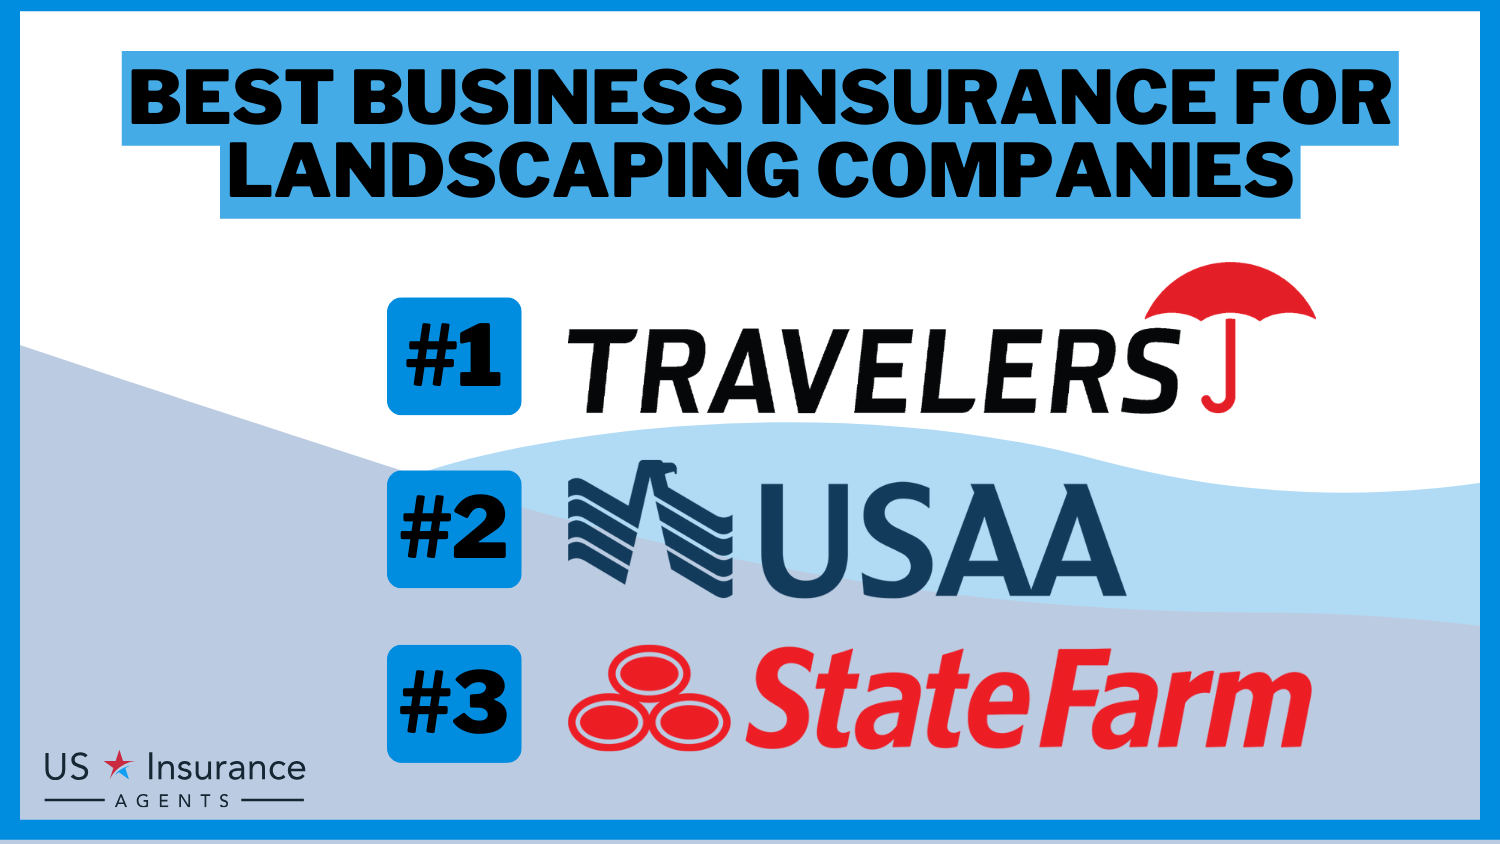 Best Business Insurance for Landscaping Companies: Travelers, USAA and State Farm.